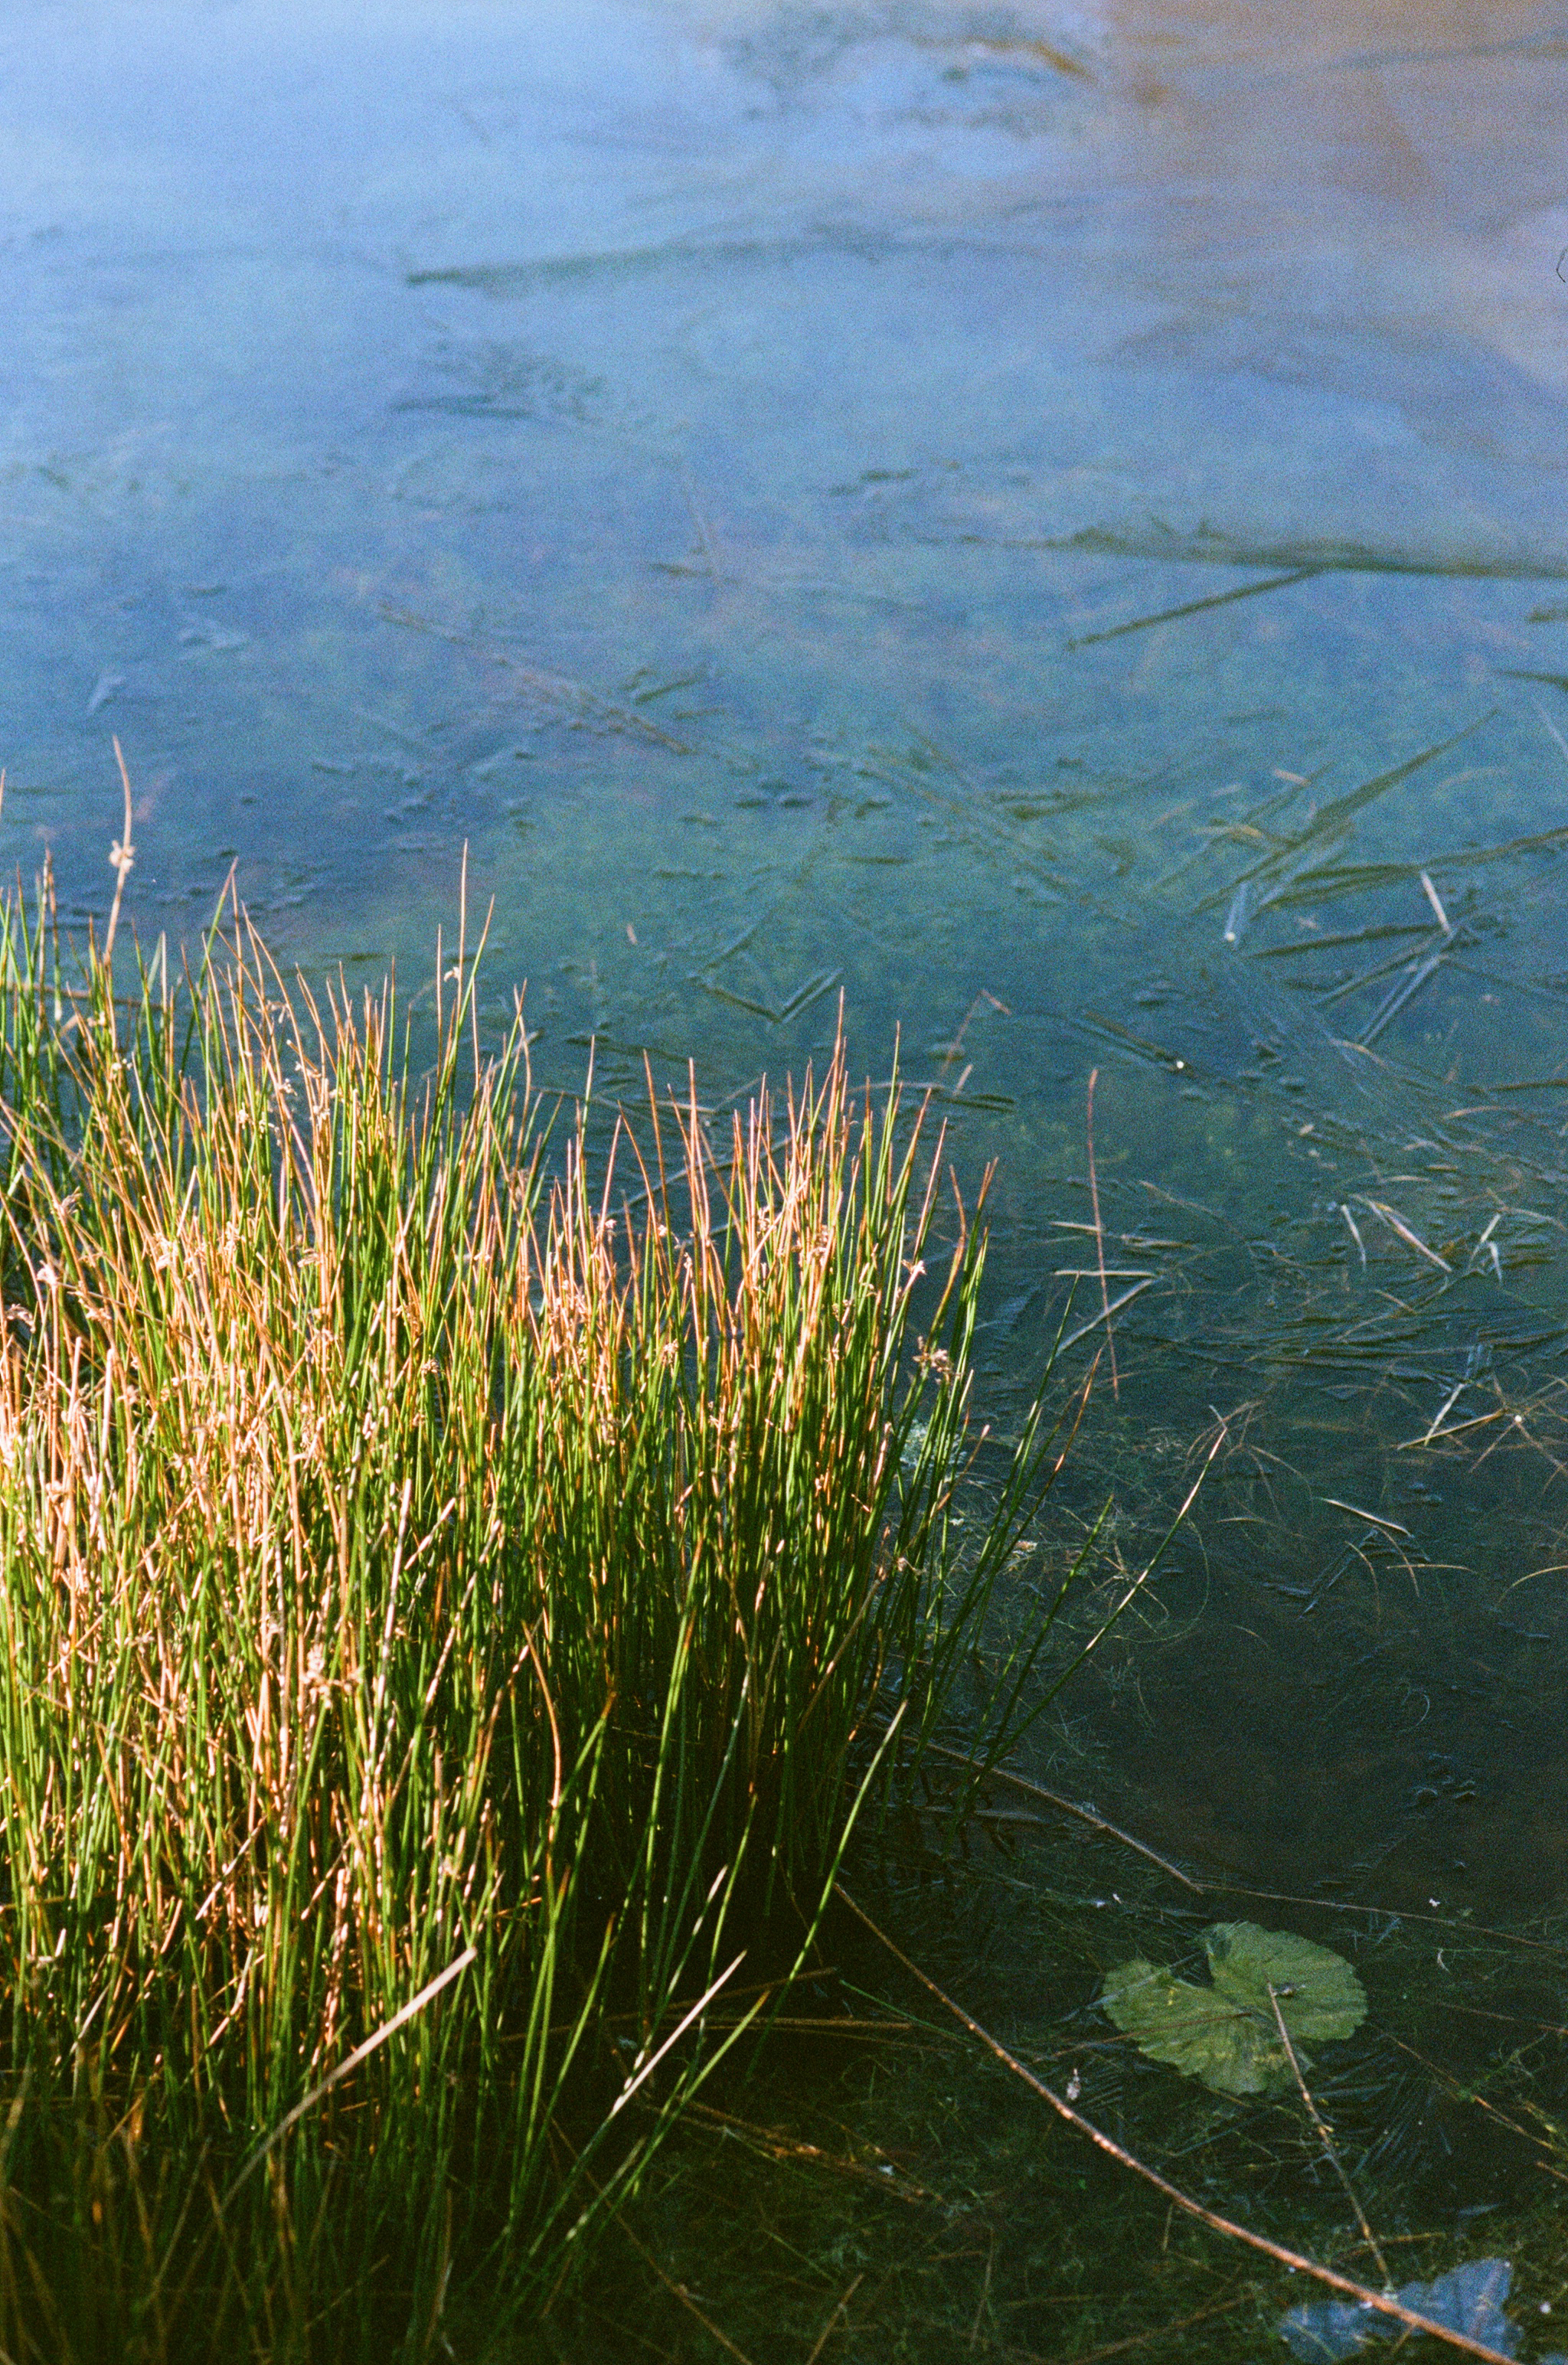 A green and blue lake with reeds in the foreground